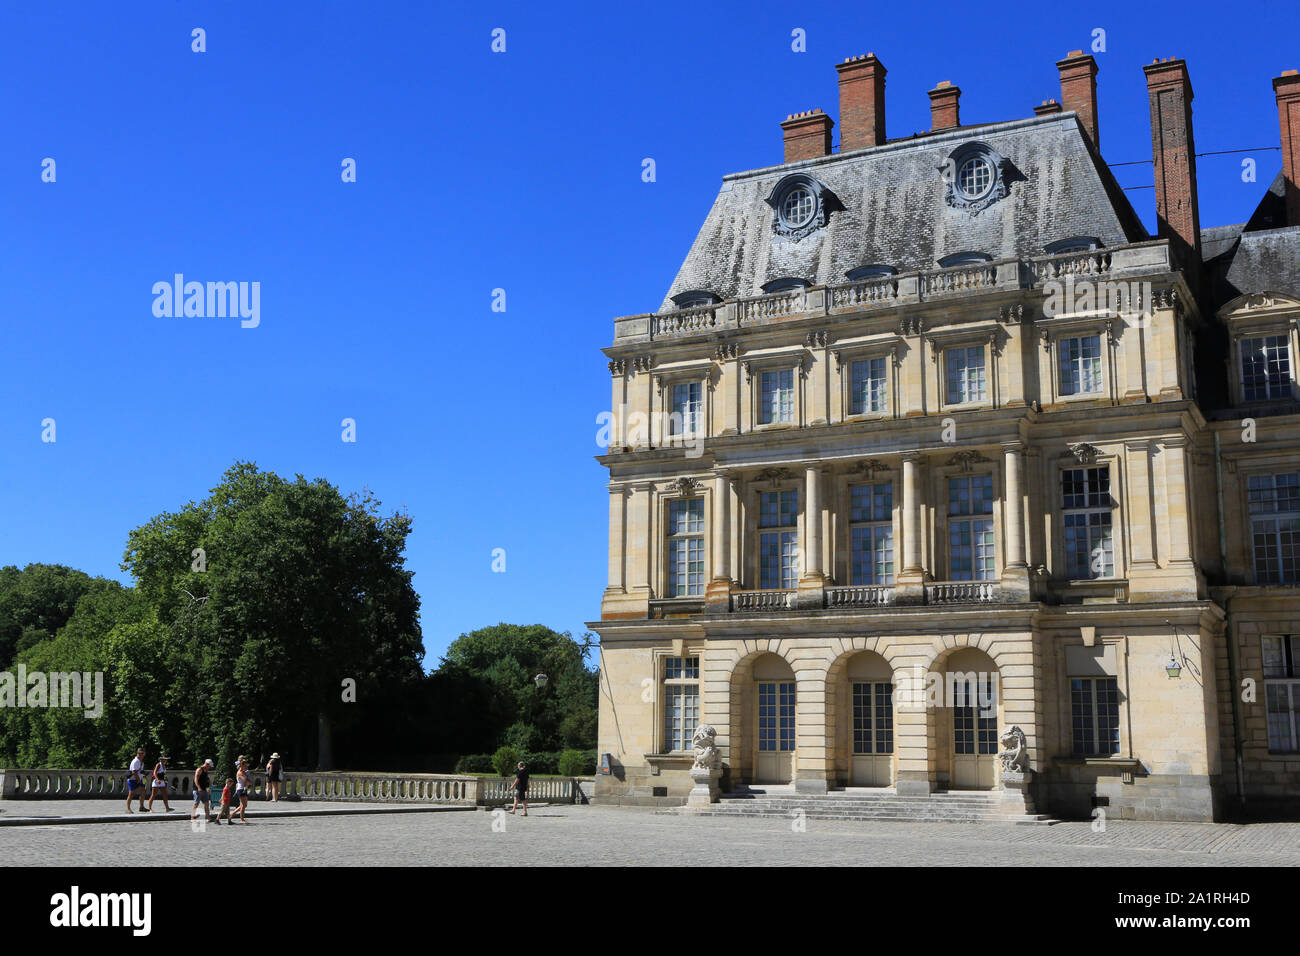 2,680 Castle Of Fontainebleau Images, Stock Photos, 3D objects